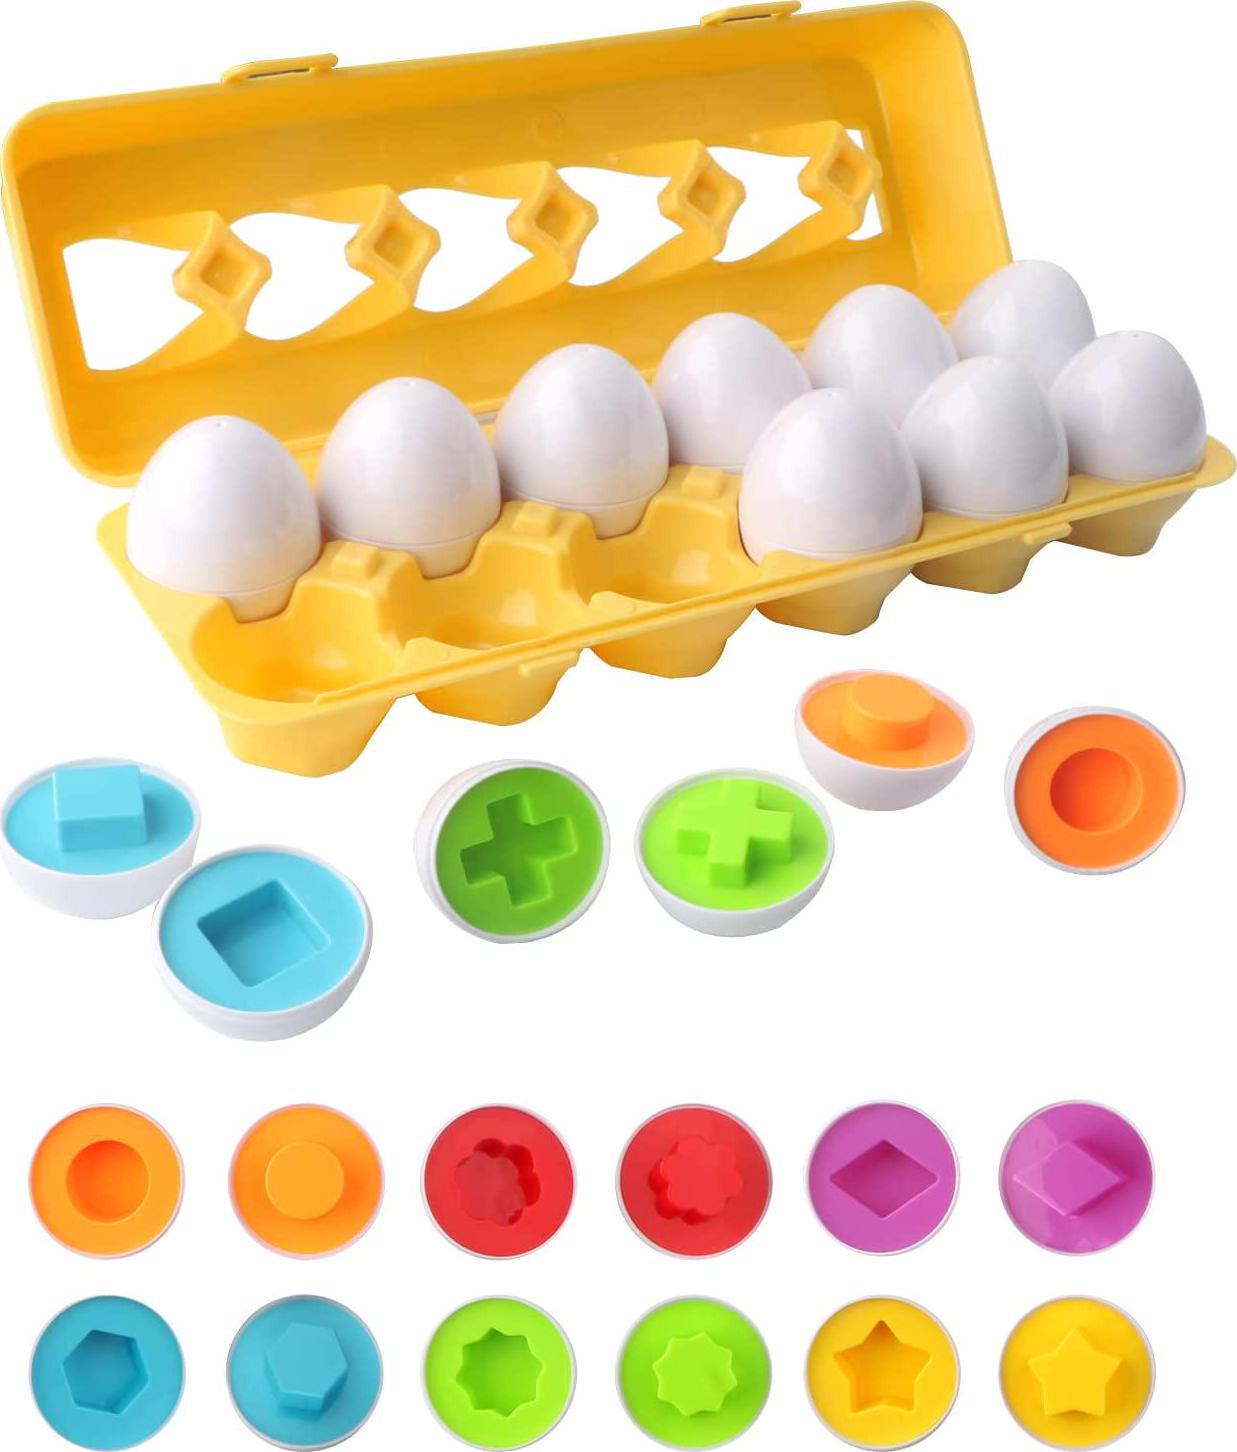 GIGIPIG, GIGIPIG Toddler Toys Matching Eggs Color and Shape Recoginition Sorter Puzzle, Fine Motor and Sensory Toys, Early Learning Educational Montessori Toy for Boys Girls 3 Years Old (12PCS)